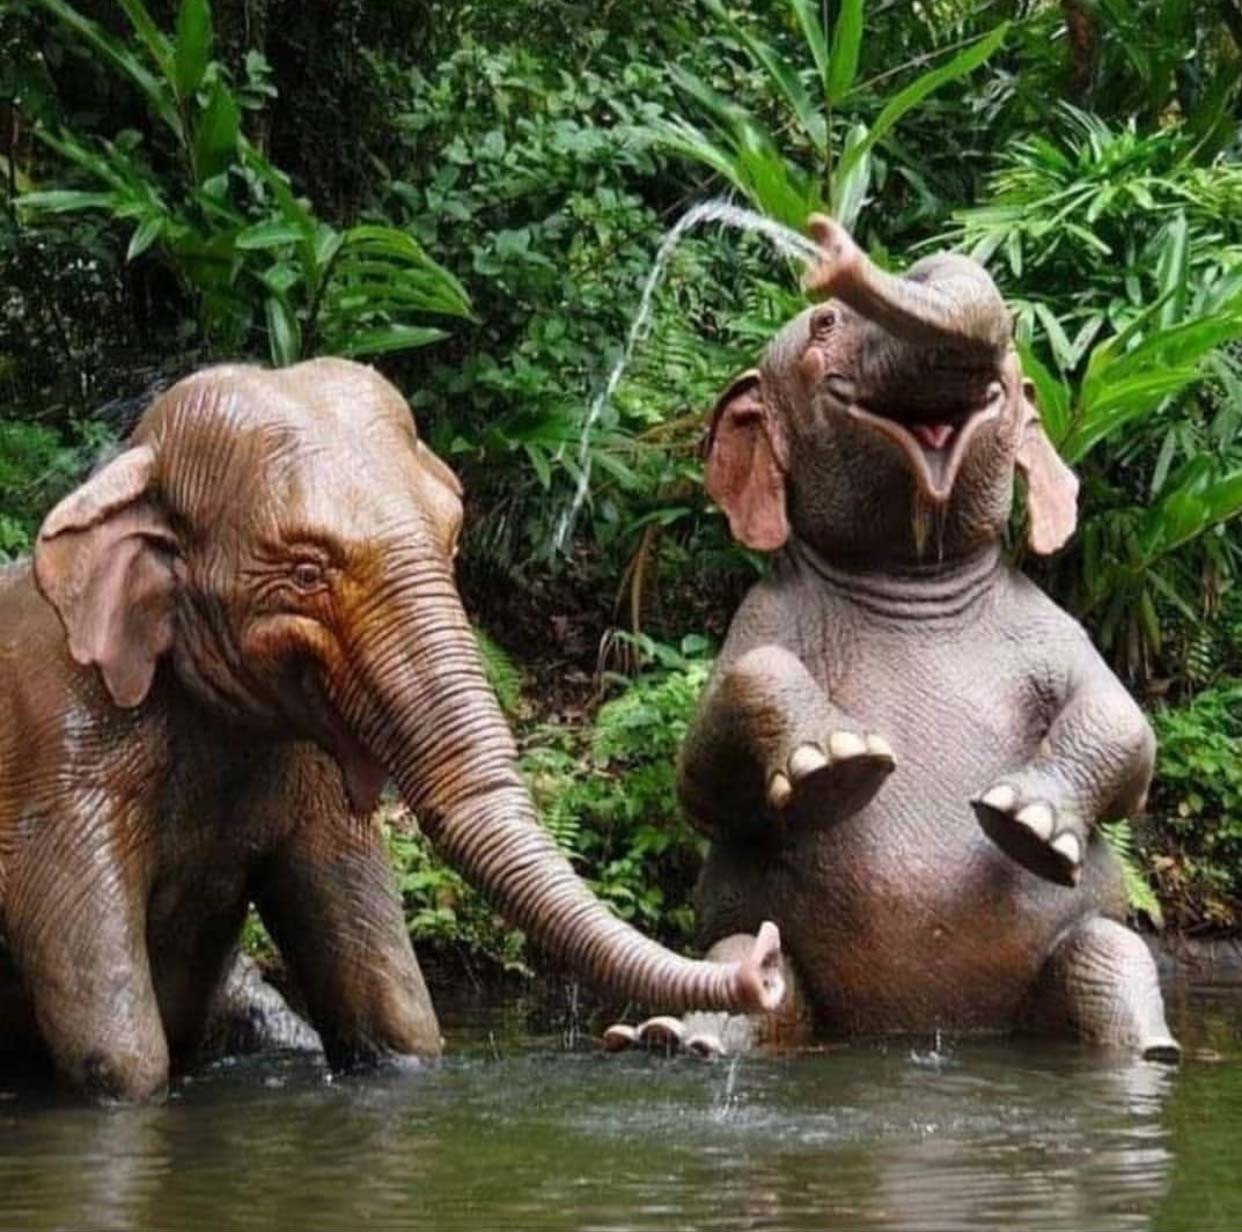 Enthusiastic Baby Elephants Delight in the Majesty of a Waterfall. l - LifeAnimal